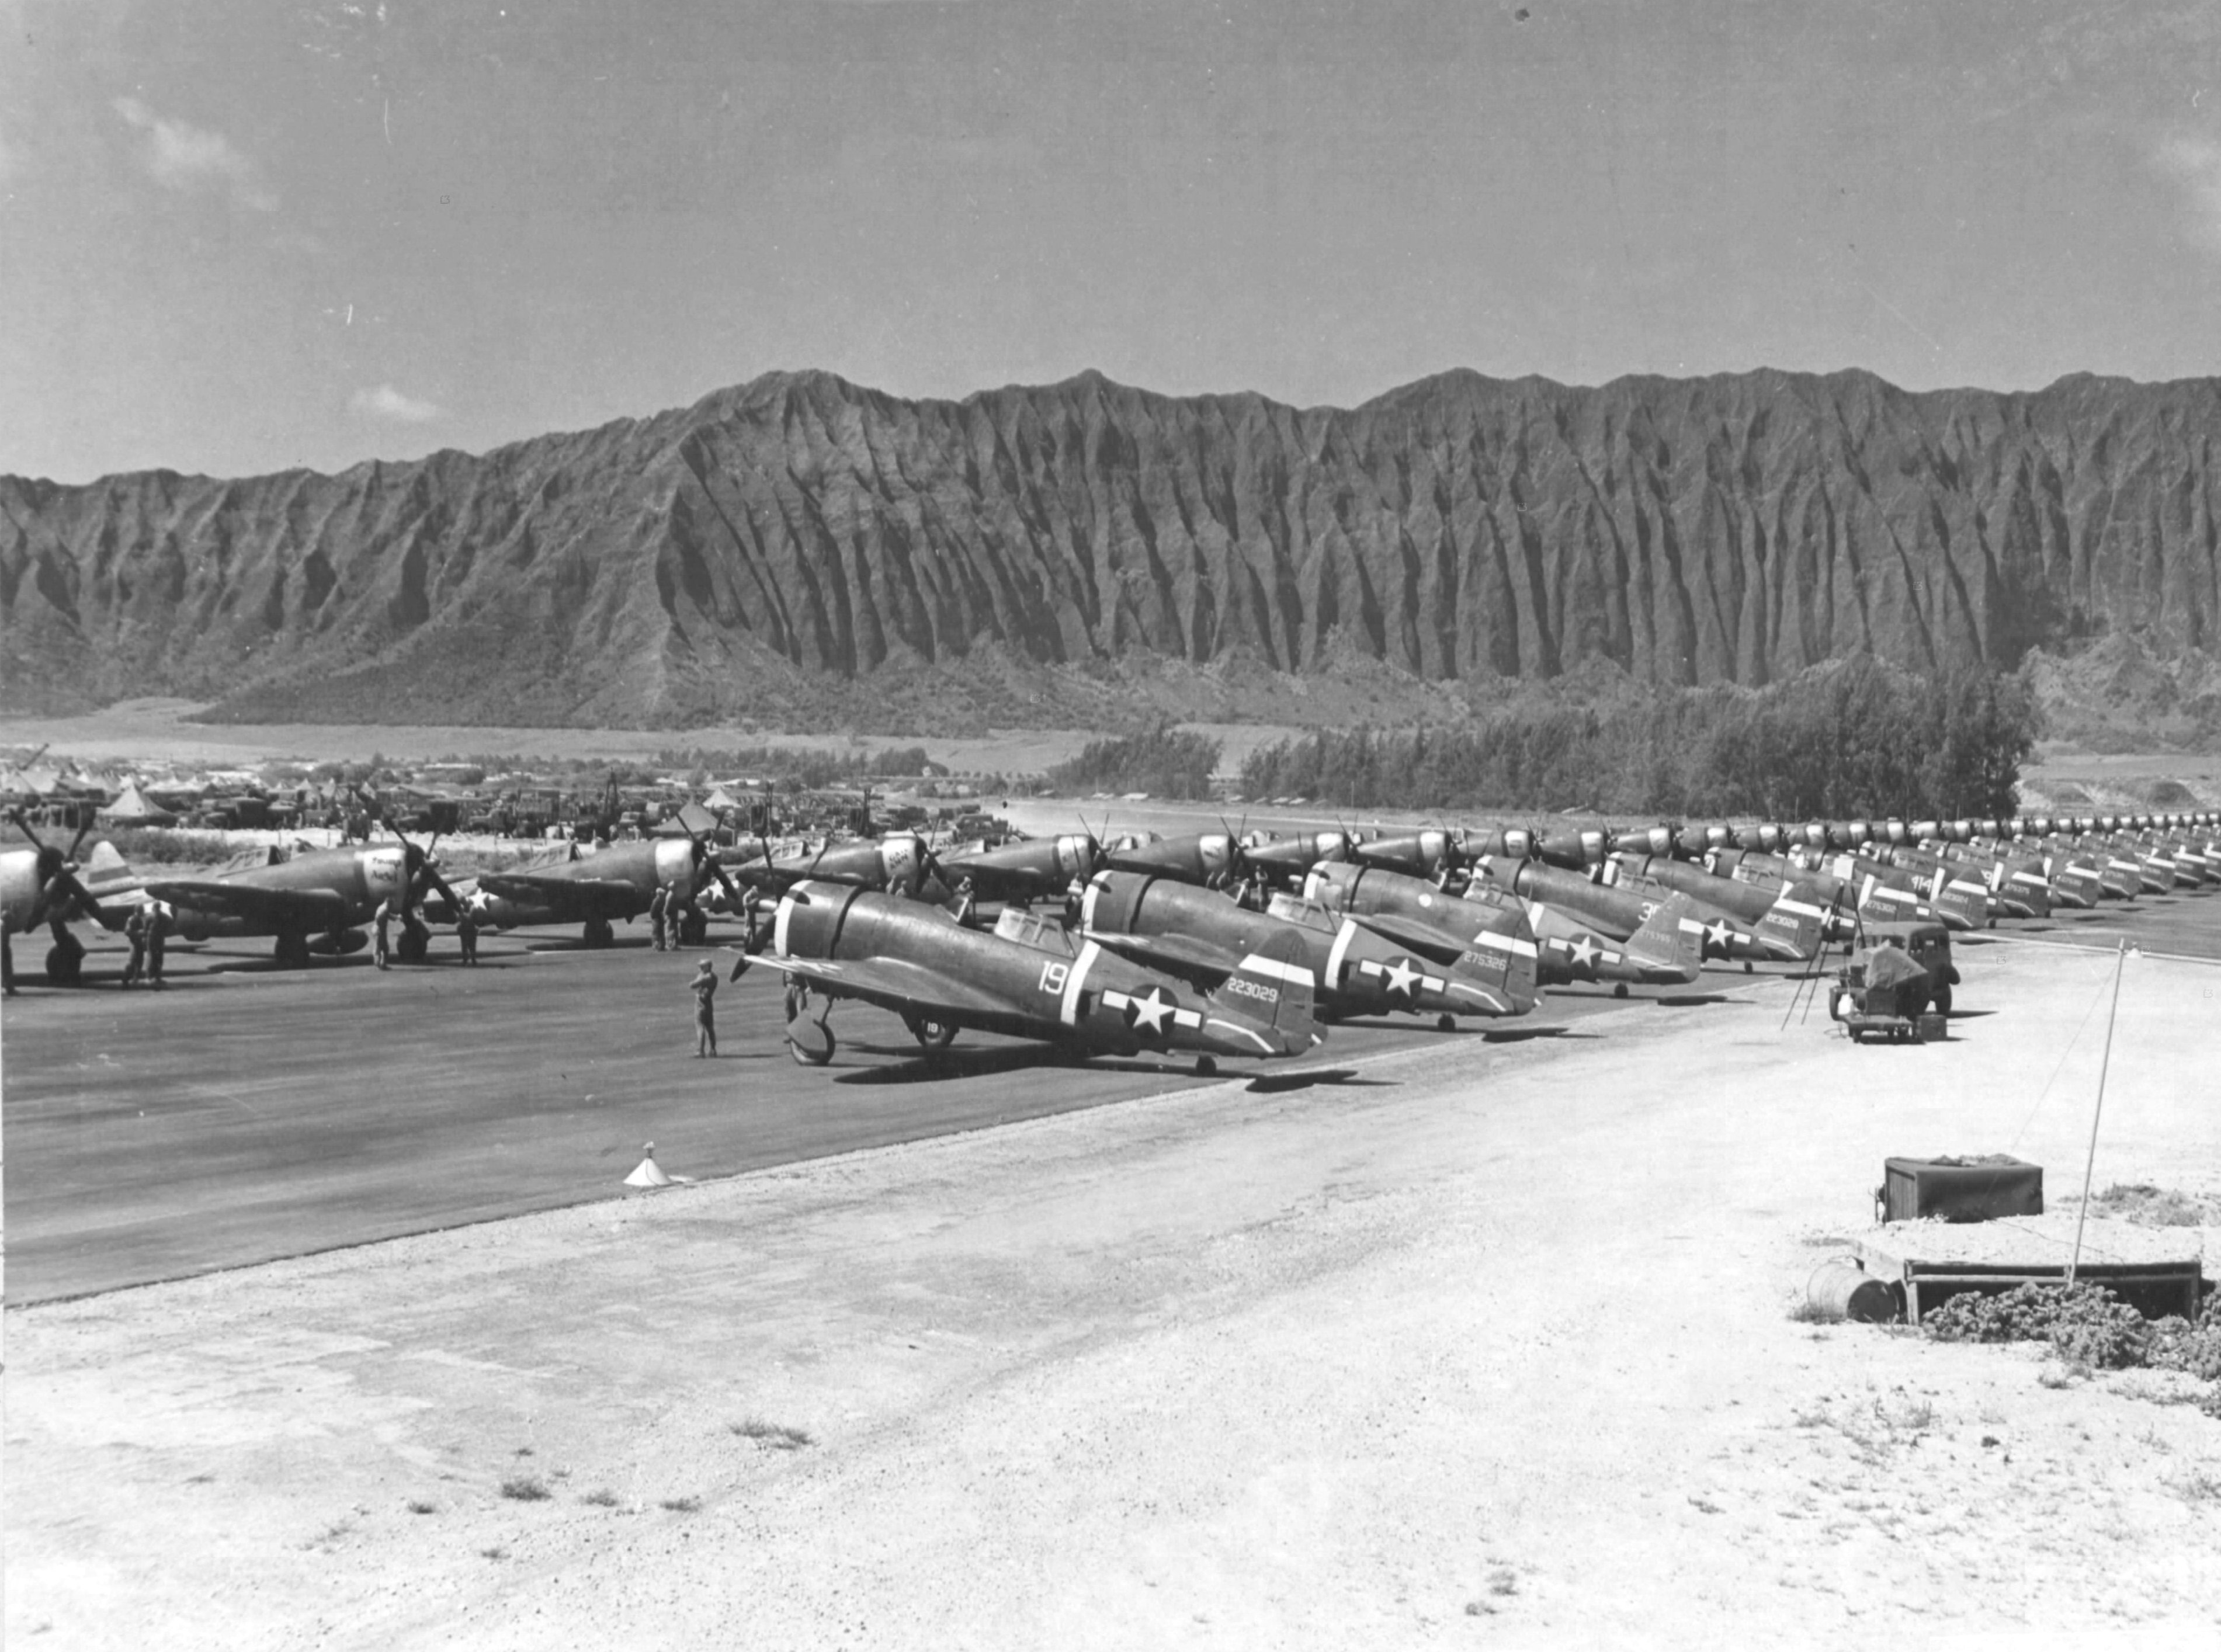 P-47 Thunderbolt aircraft of the 318th Fighter Group lined up for an inspection at Bellows Field, Oahu, US Territory of Hawaii, 15 May 1944. Photo 2 of 8.